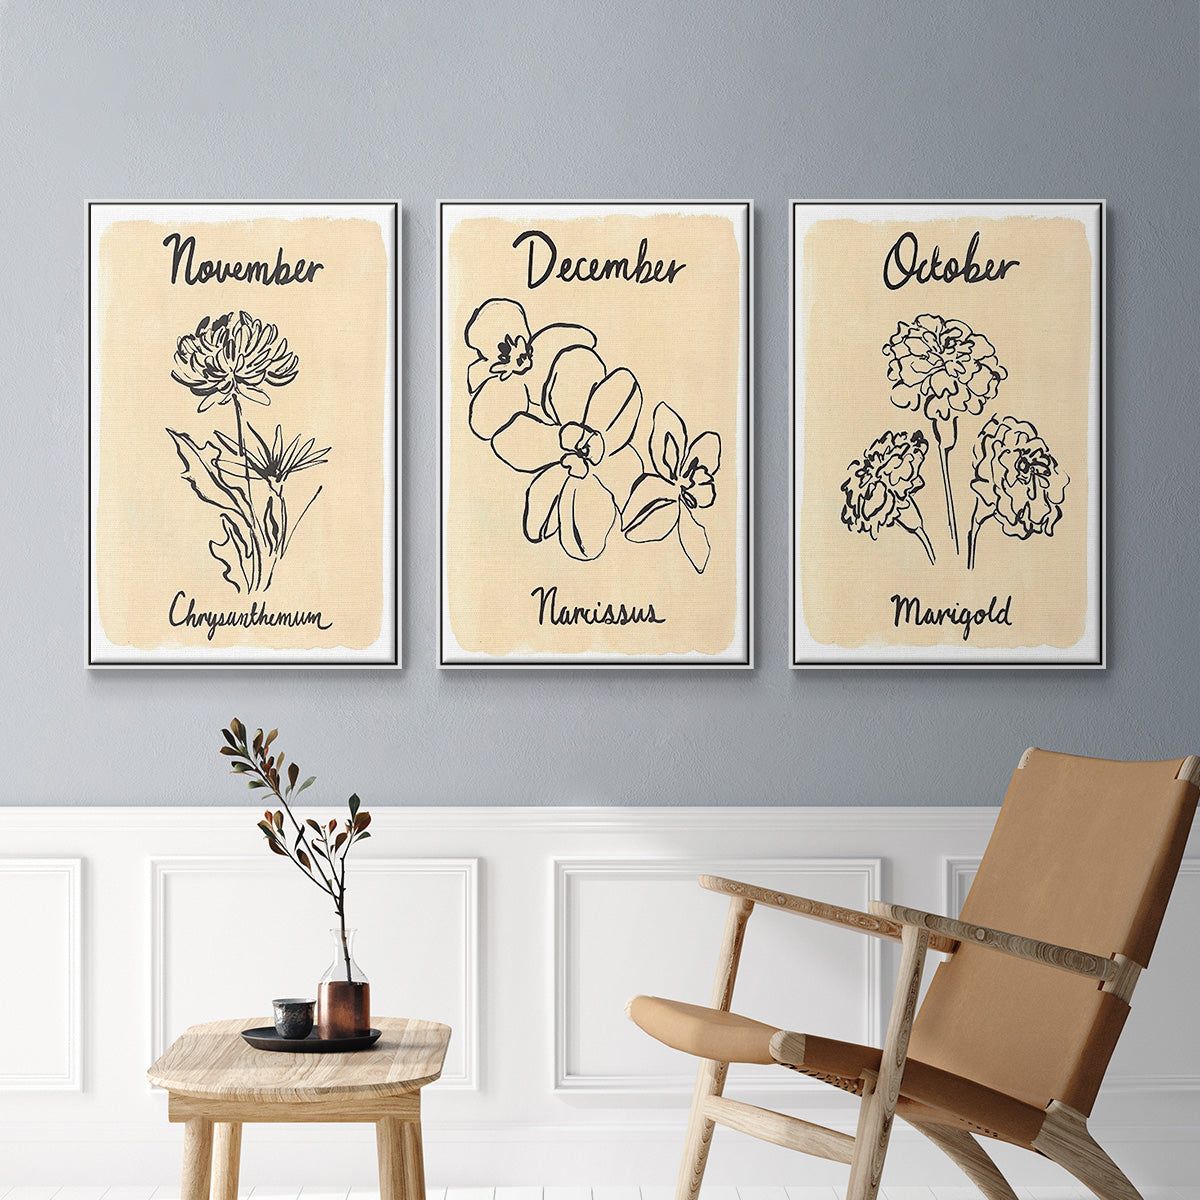 Birth Month X - Framed Premium Gallery Wrapped Canvas L Frame 3 Piece Set - Ready to Hang